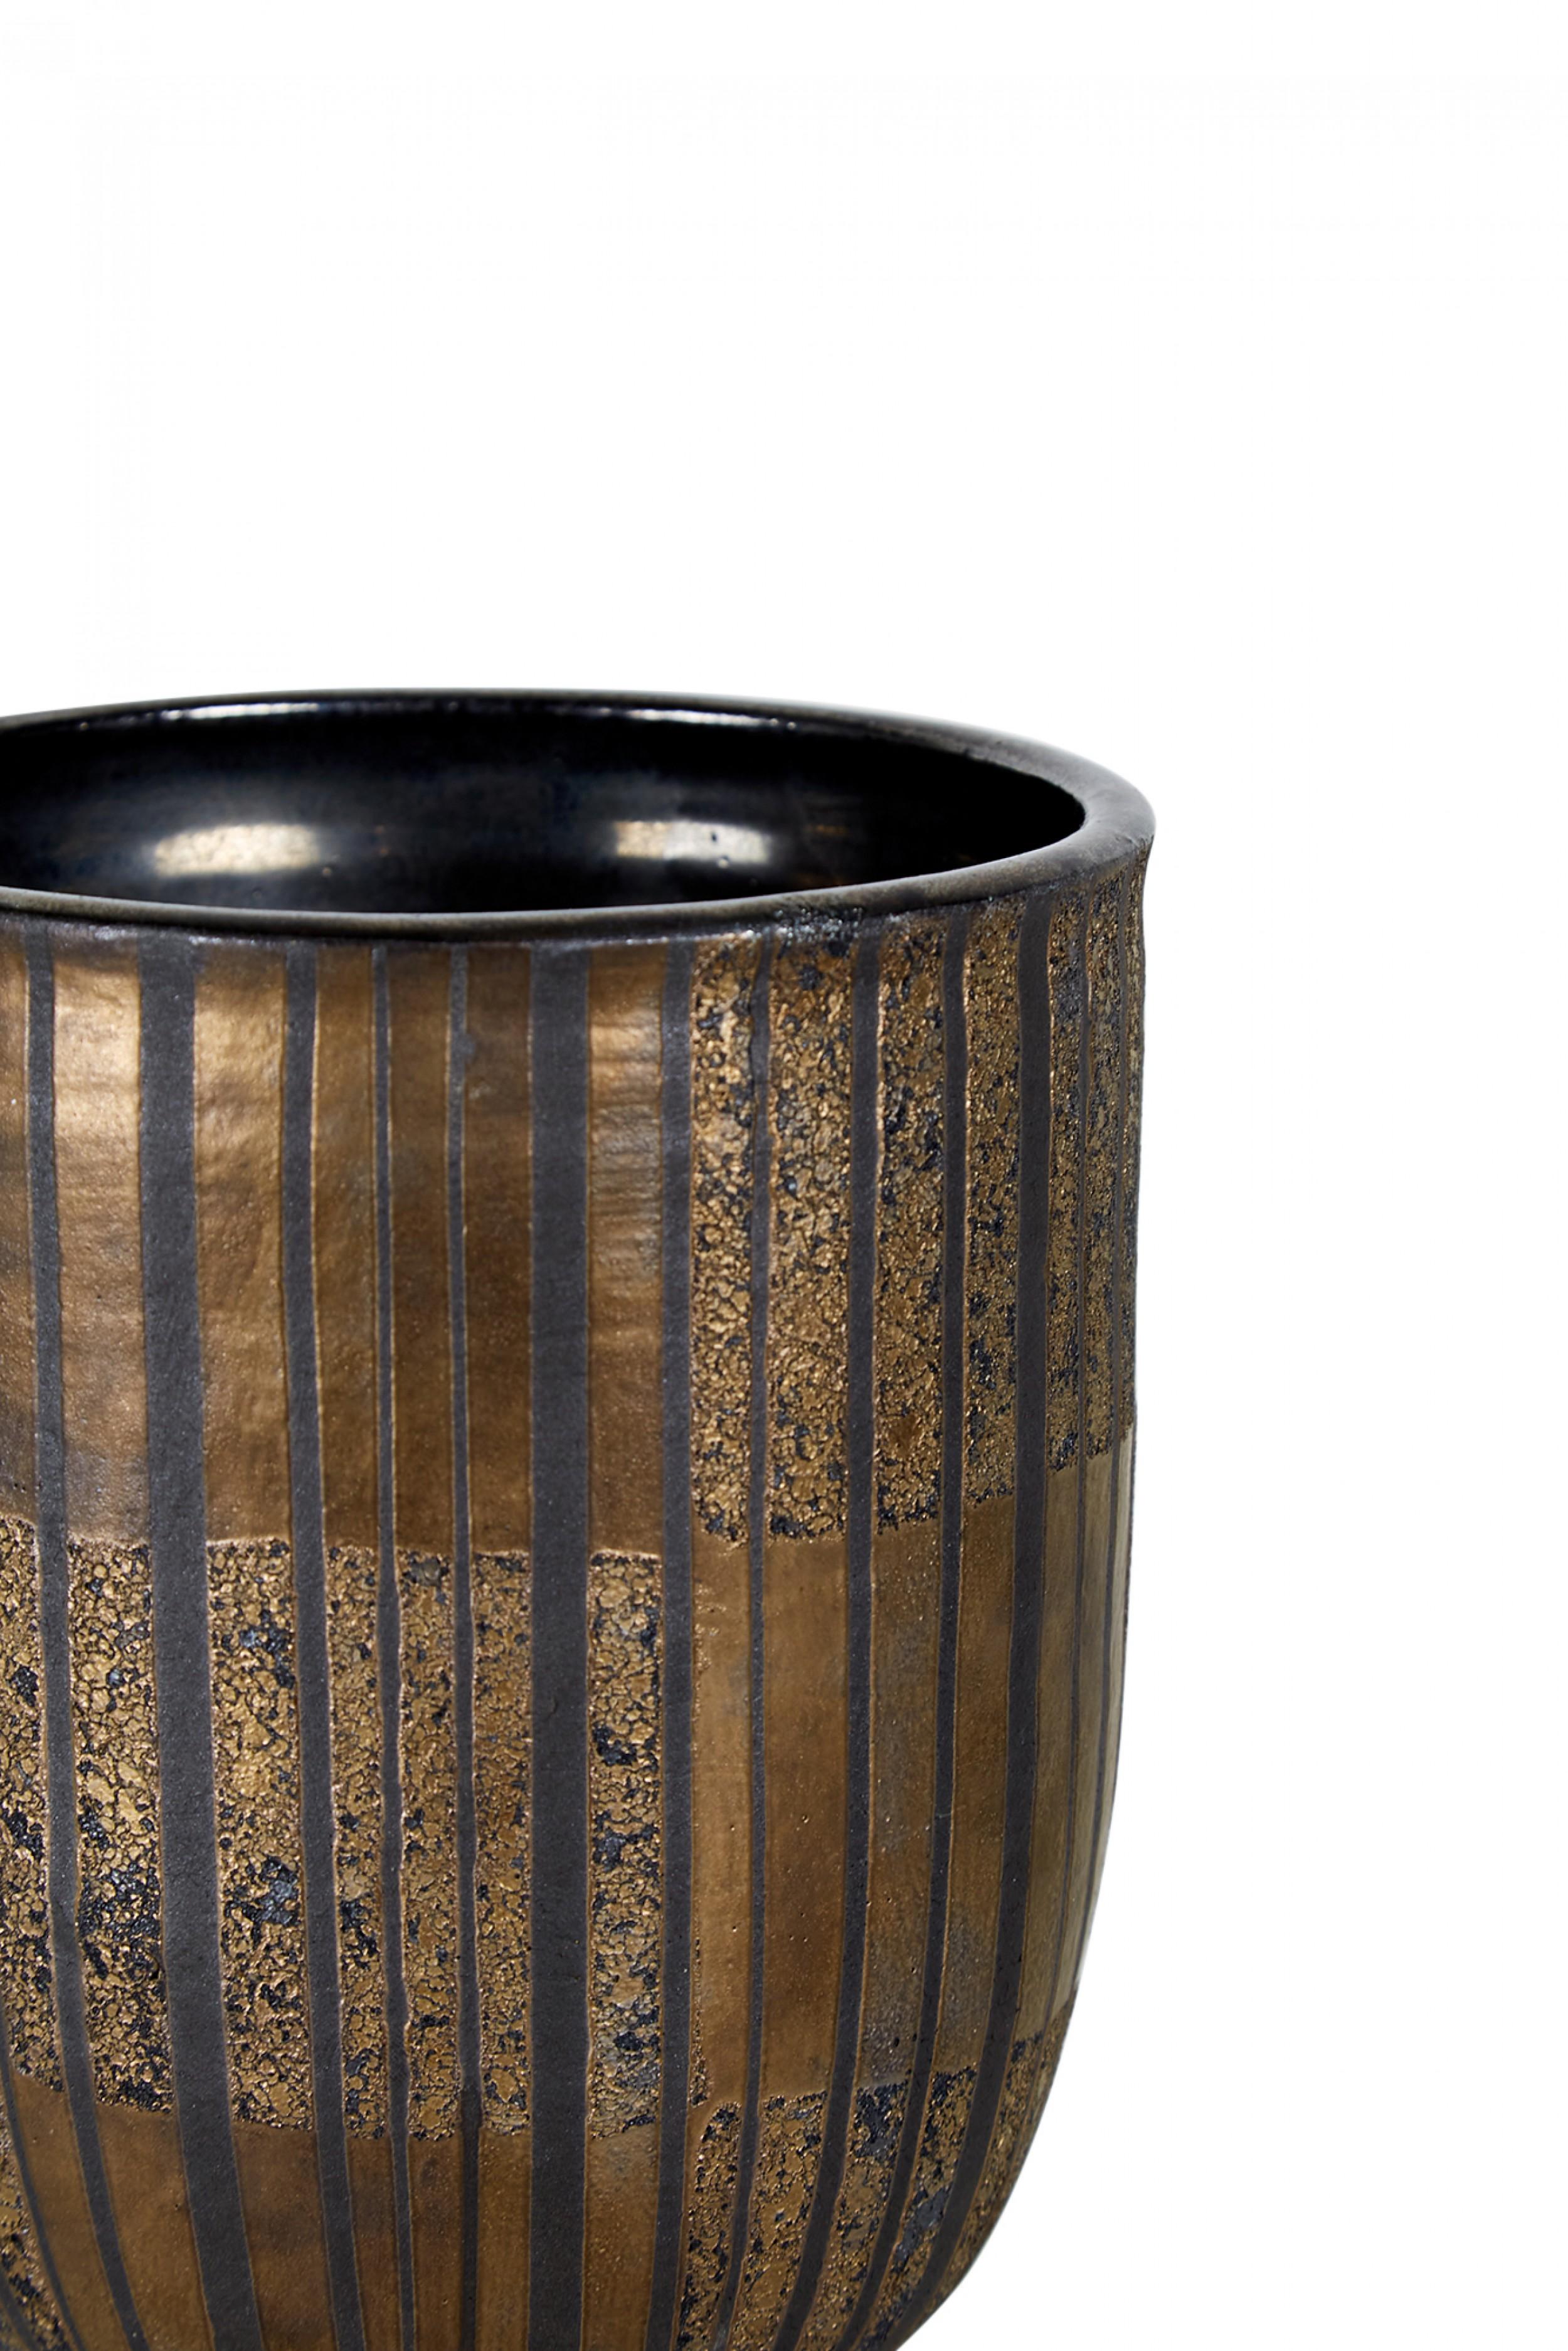 Gary Di Pasquale Contemporary Thrown Bronze and Black Glazed Cylindrical Vase In Good Condition For Sale In New York, NY